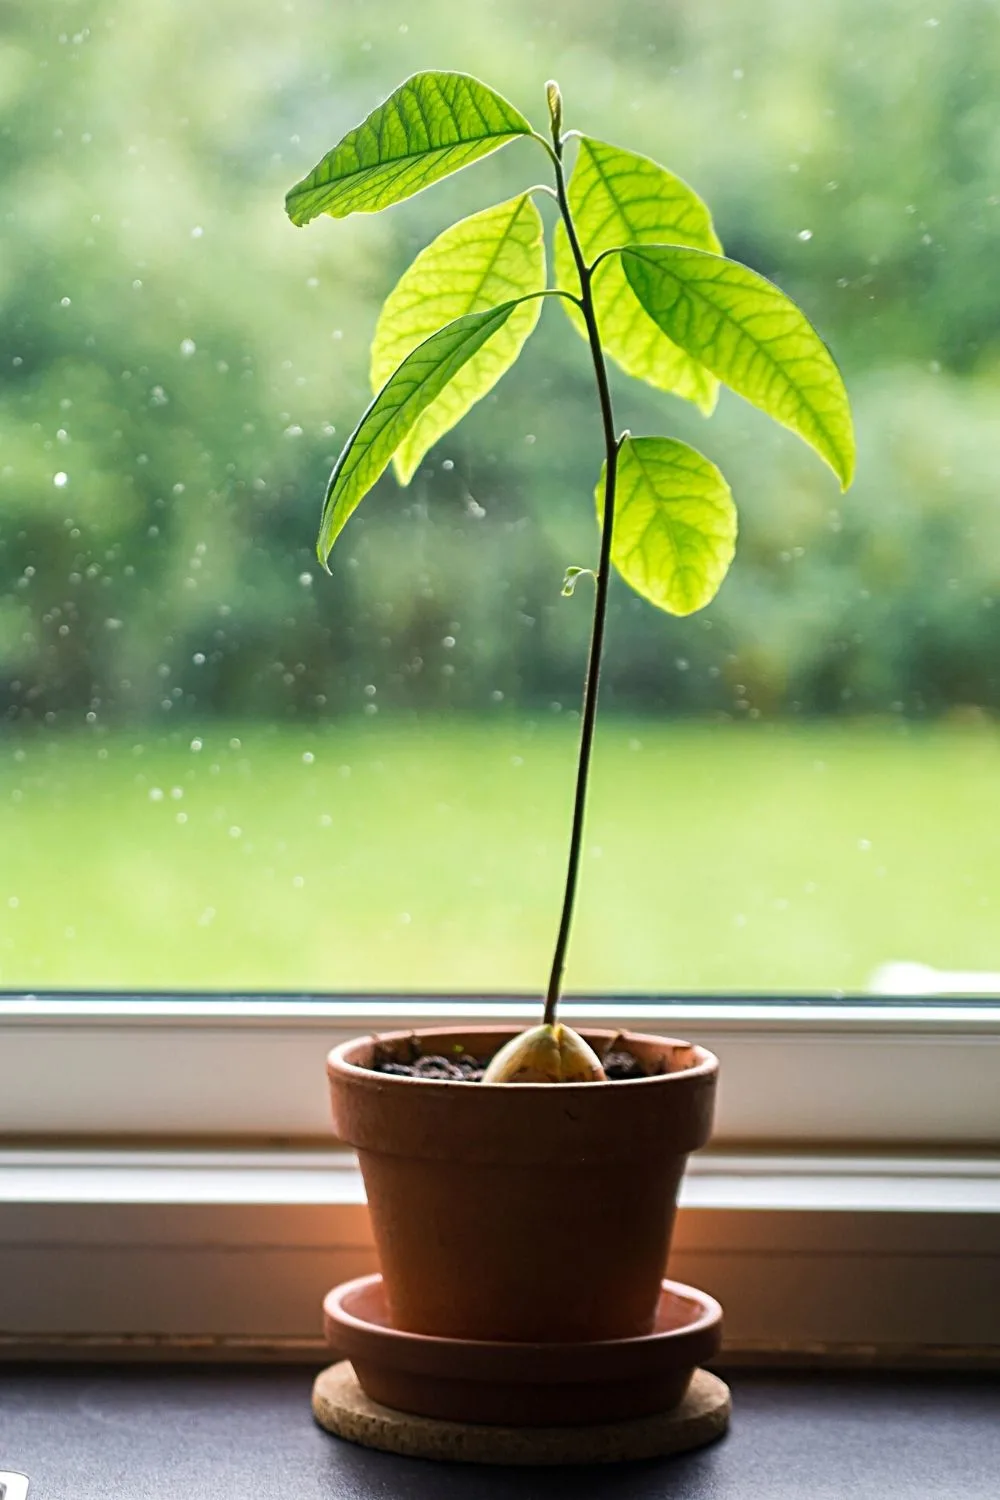 Choose a suitable place to grow your avocado plant, making sure it has consistent environment